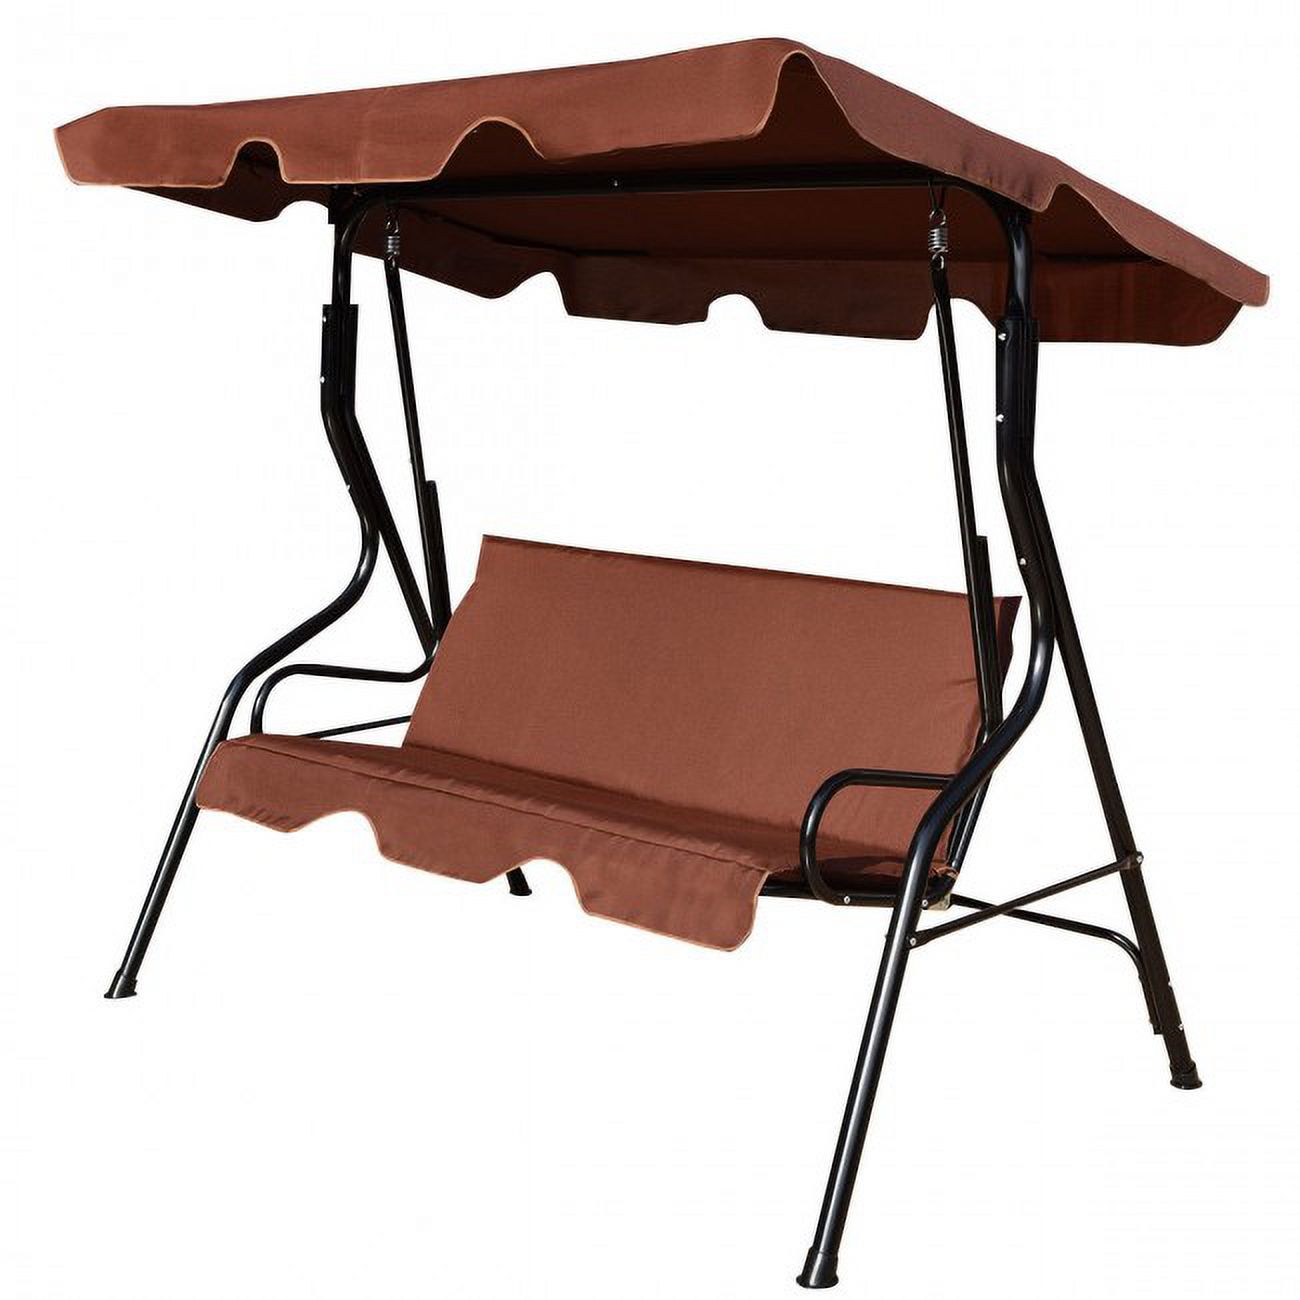 SUGIFT 3 Seat Canopy Swing with Cushioned Steel Frame Outdoor Garden Patio Lounge Chair - image 3 of 9